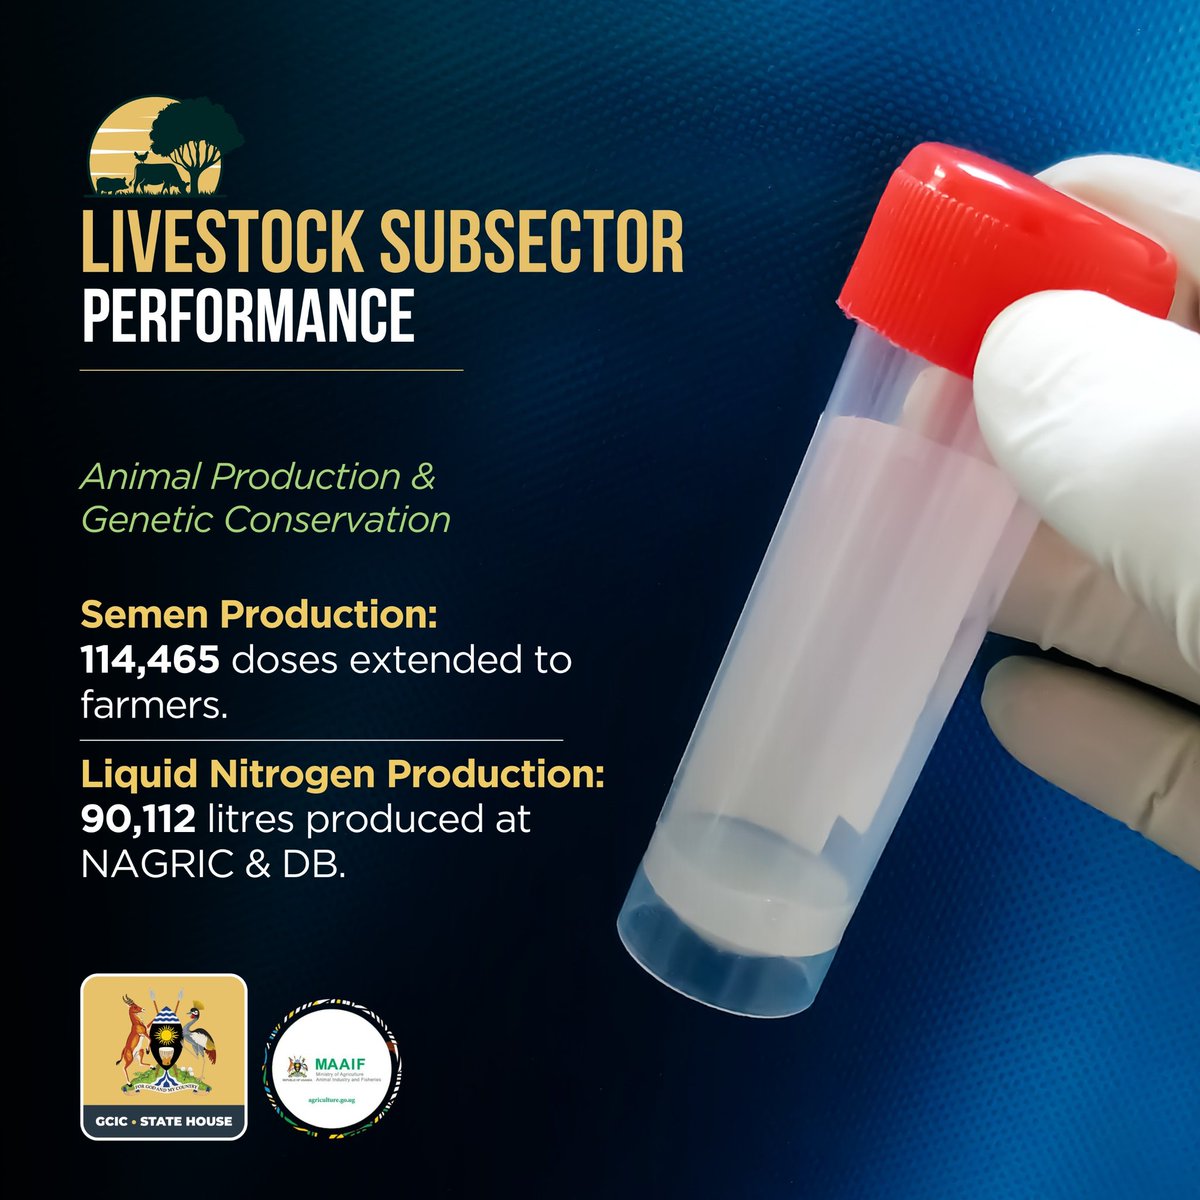 𝐋𝐈𝐕𝐄𝐒𝐓𝐎𝐂𝐊 𝐒𝐔𝐁 𝐒𝐄𝐂𝐓𝐎𝐑 Livestock sub-sector records the production and extension of 114,465 doses of semen to farmers, alongside the production of 90,112 litres of Liquid Nitrogen at NAGRIC & DB. #OpenGovUg